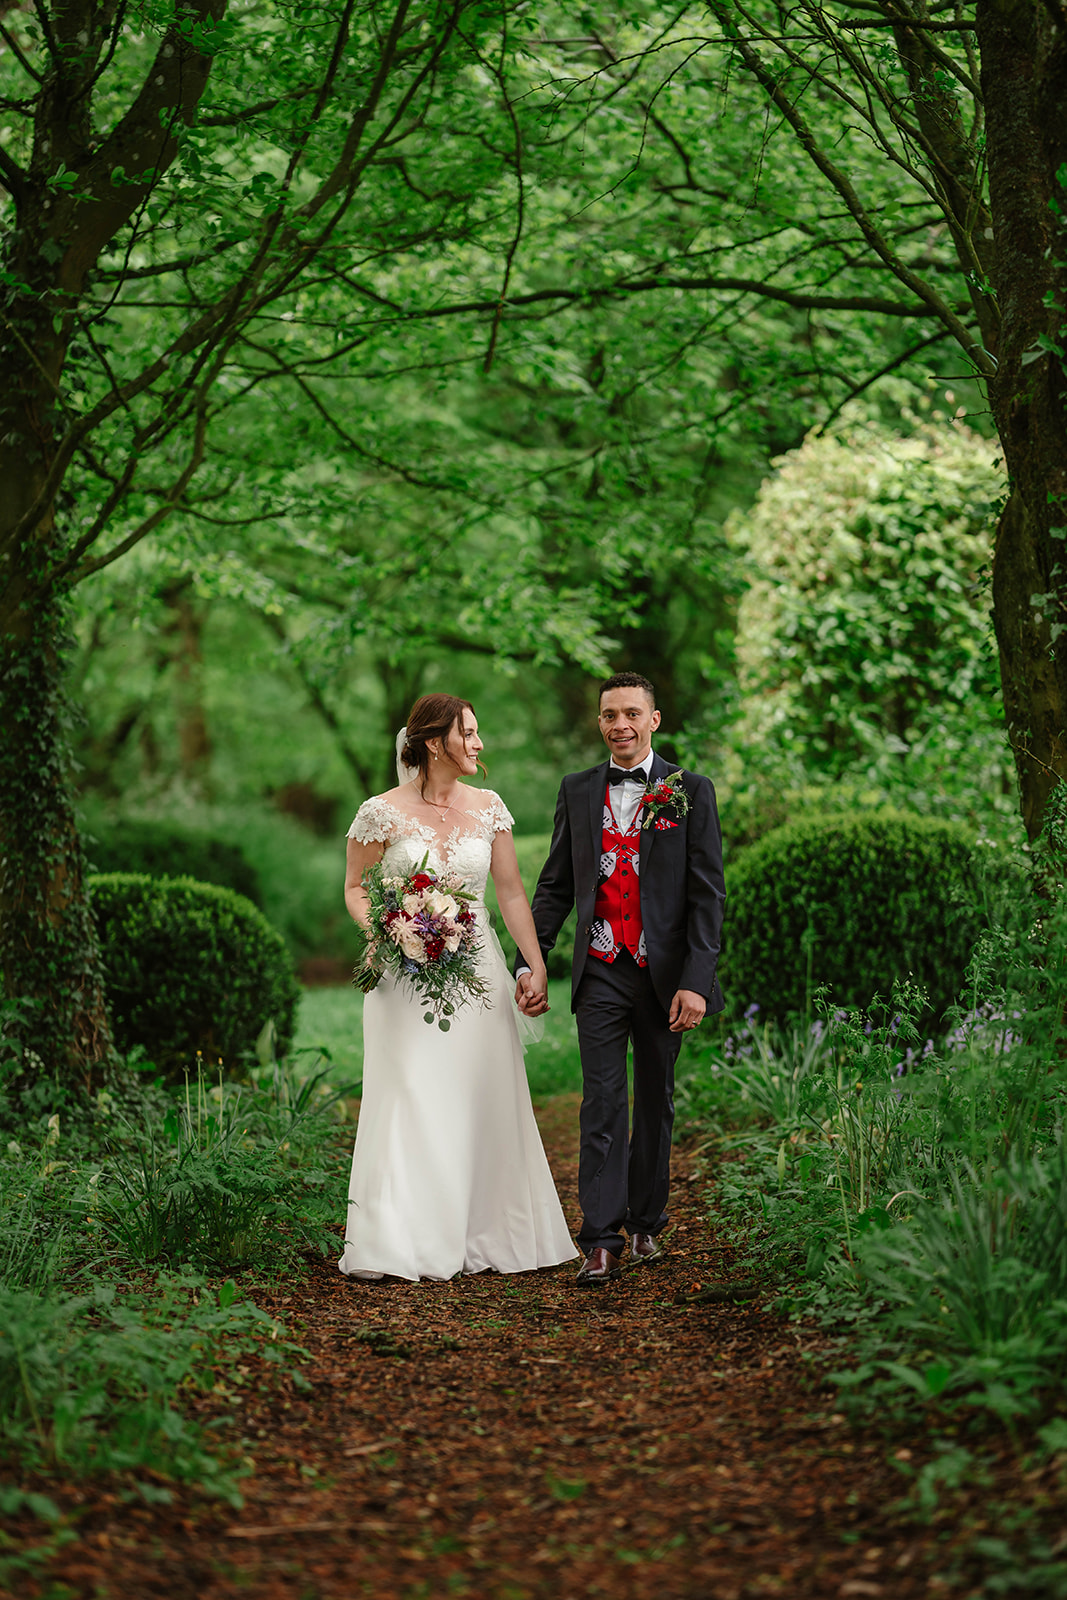 Bride and Groom surrounded by trees and shrubs